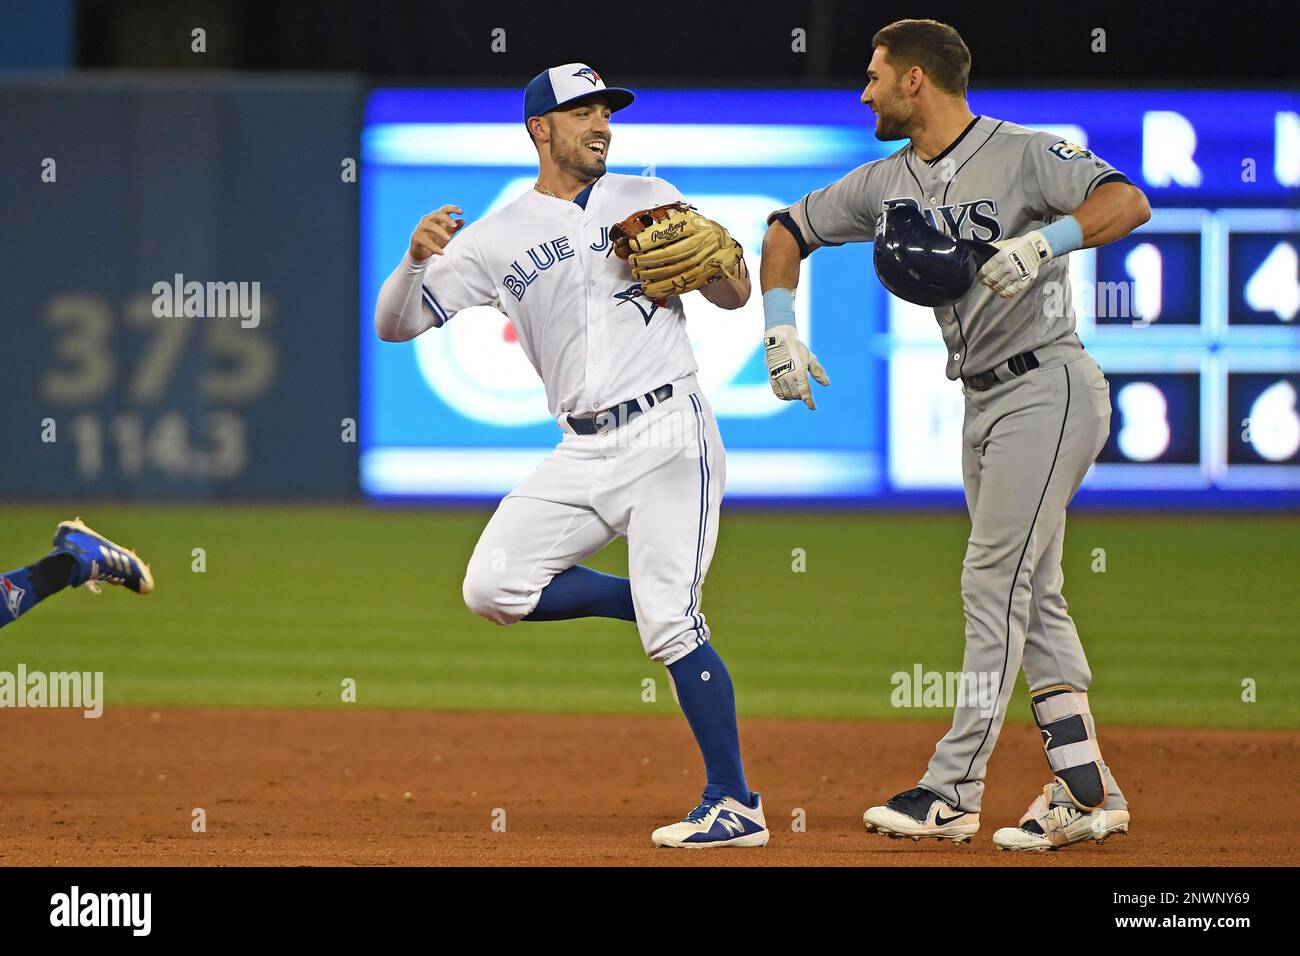 Kevin Kiermaier robs home run in Blue Jays' first game at